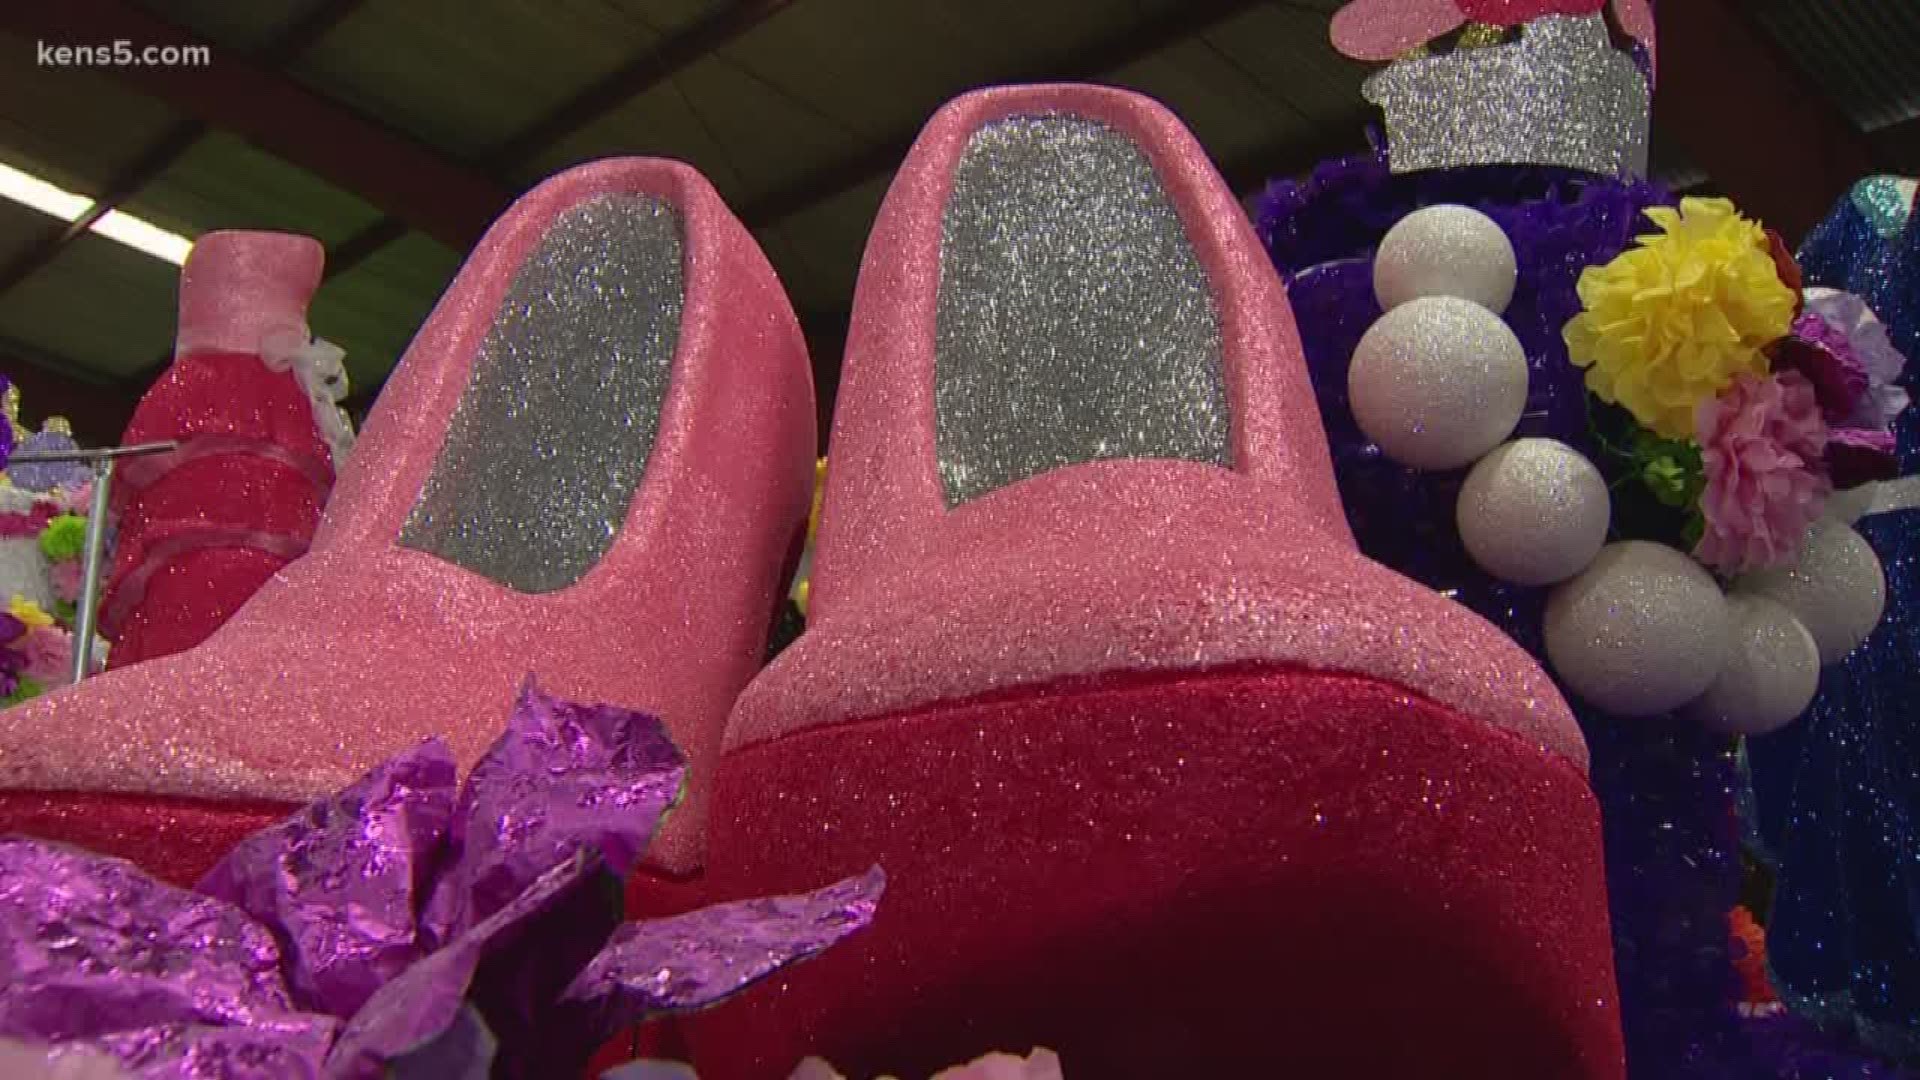 The Battle of Flowers Parade isn't until next Friday, April 27, but KENS 5 got a sneak peek at some of the floats.